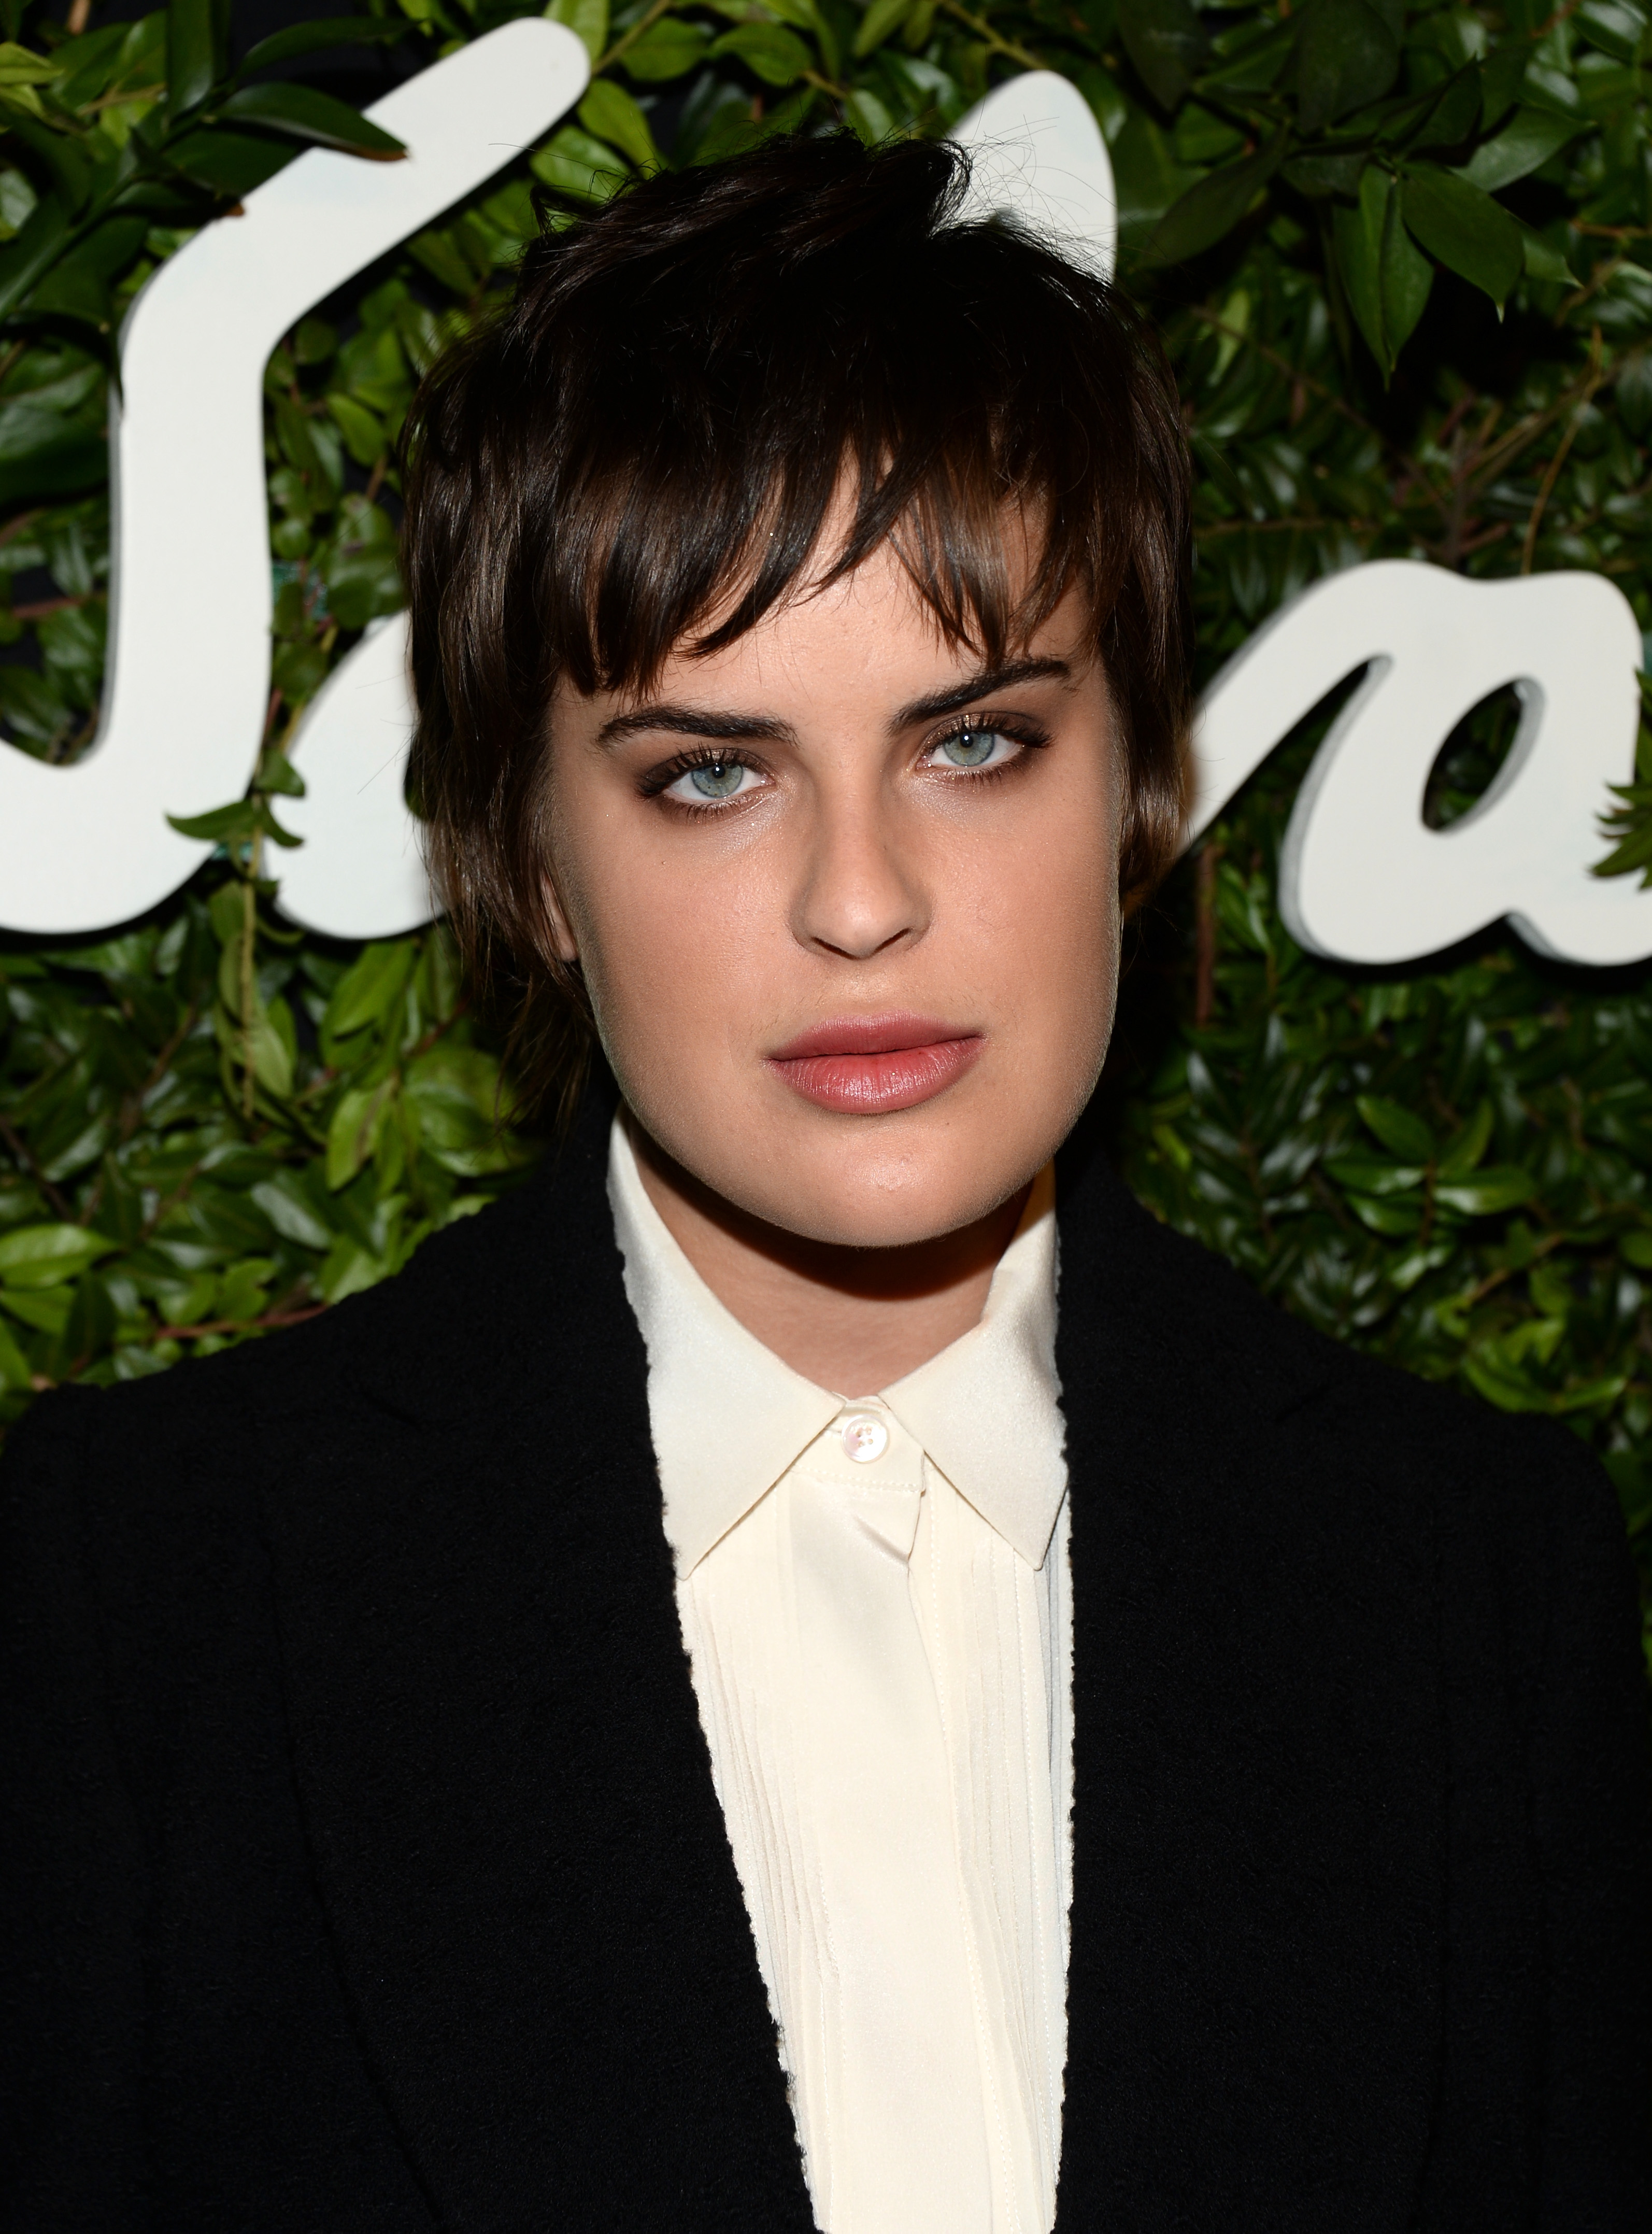 Tallulah Willis at the Salvatore Ferragamo 100 Years In Hollywood celebration on September 9, 2015, in Beverly Hills, California. | Source: Getty Images